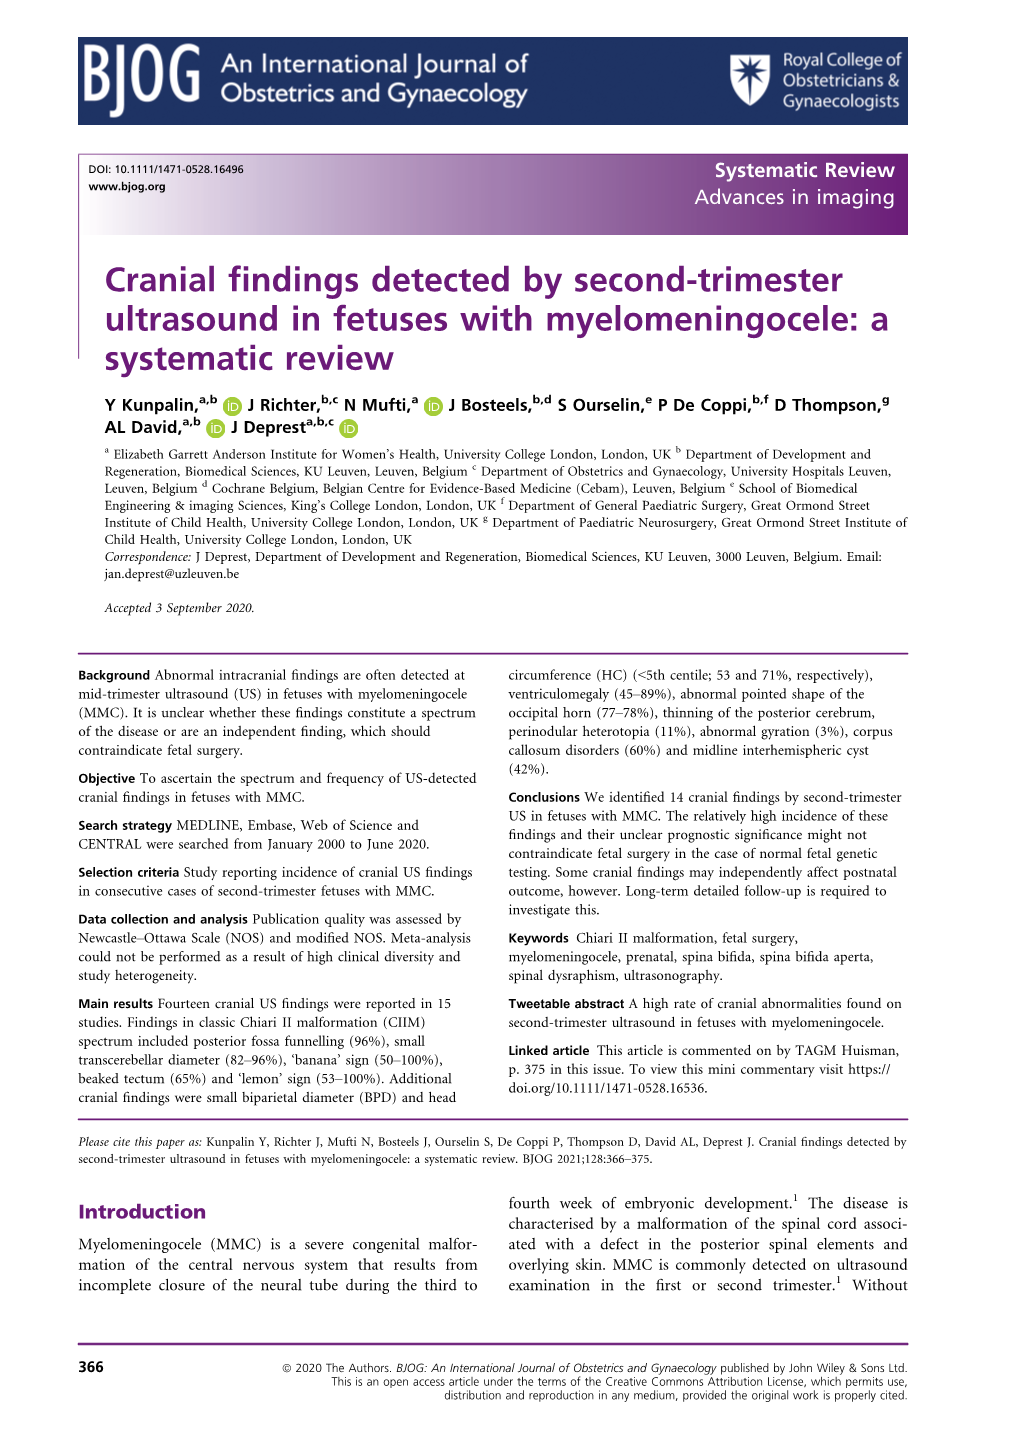 Cranial Findings Detected by Second‐Trimester Ultrasound in Fetuses With